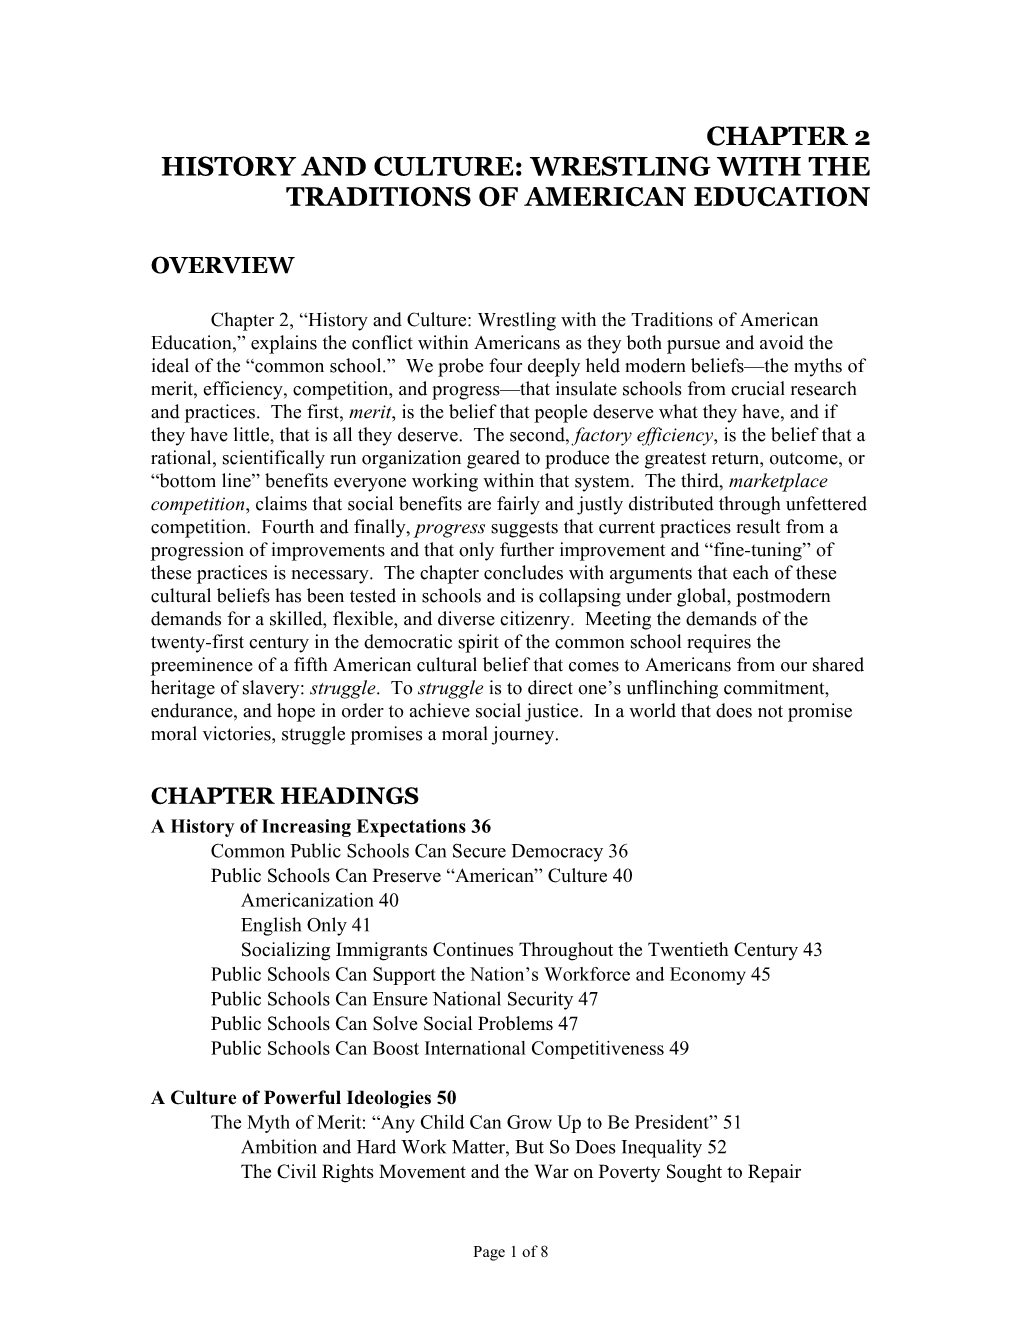 History and Culture: Wrestling with the Traditions of American Education